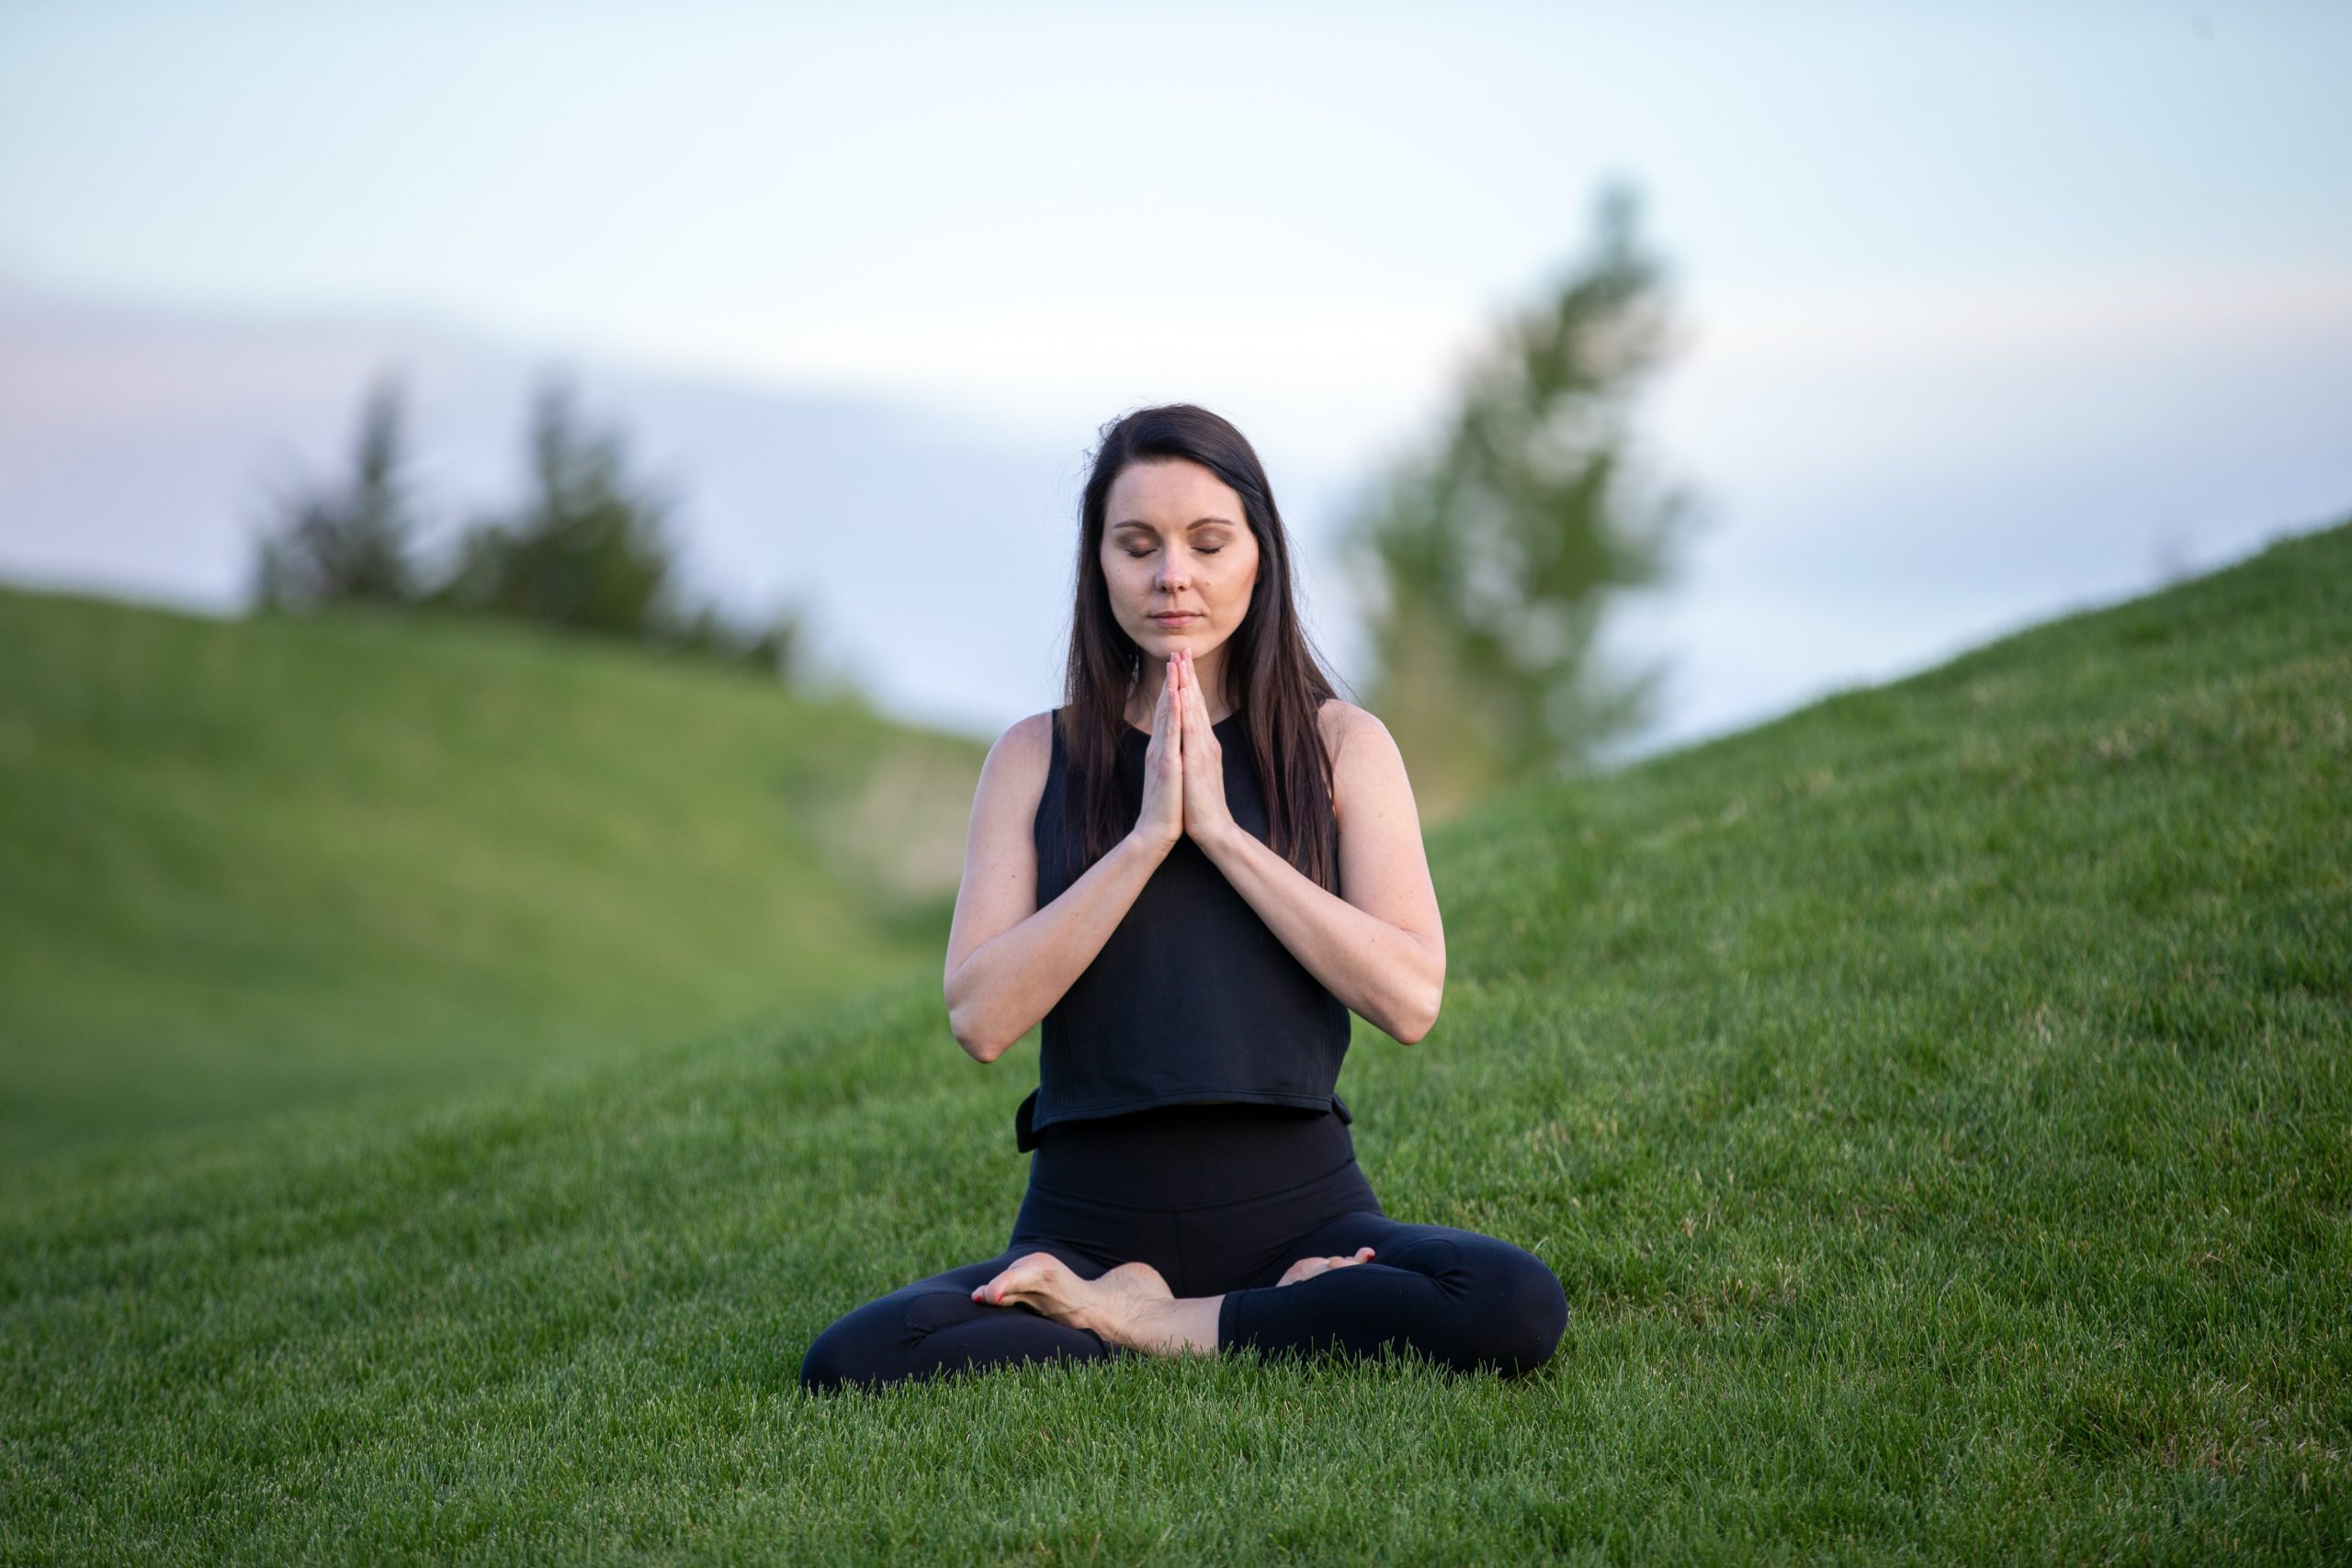 Discover True Relaxation Through Restorative Mindful Breathing Exercises